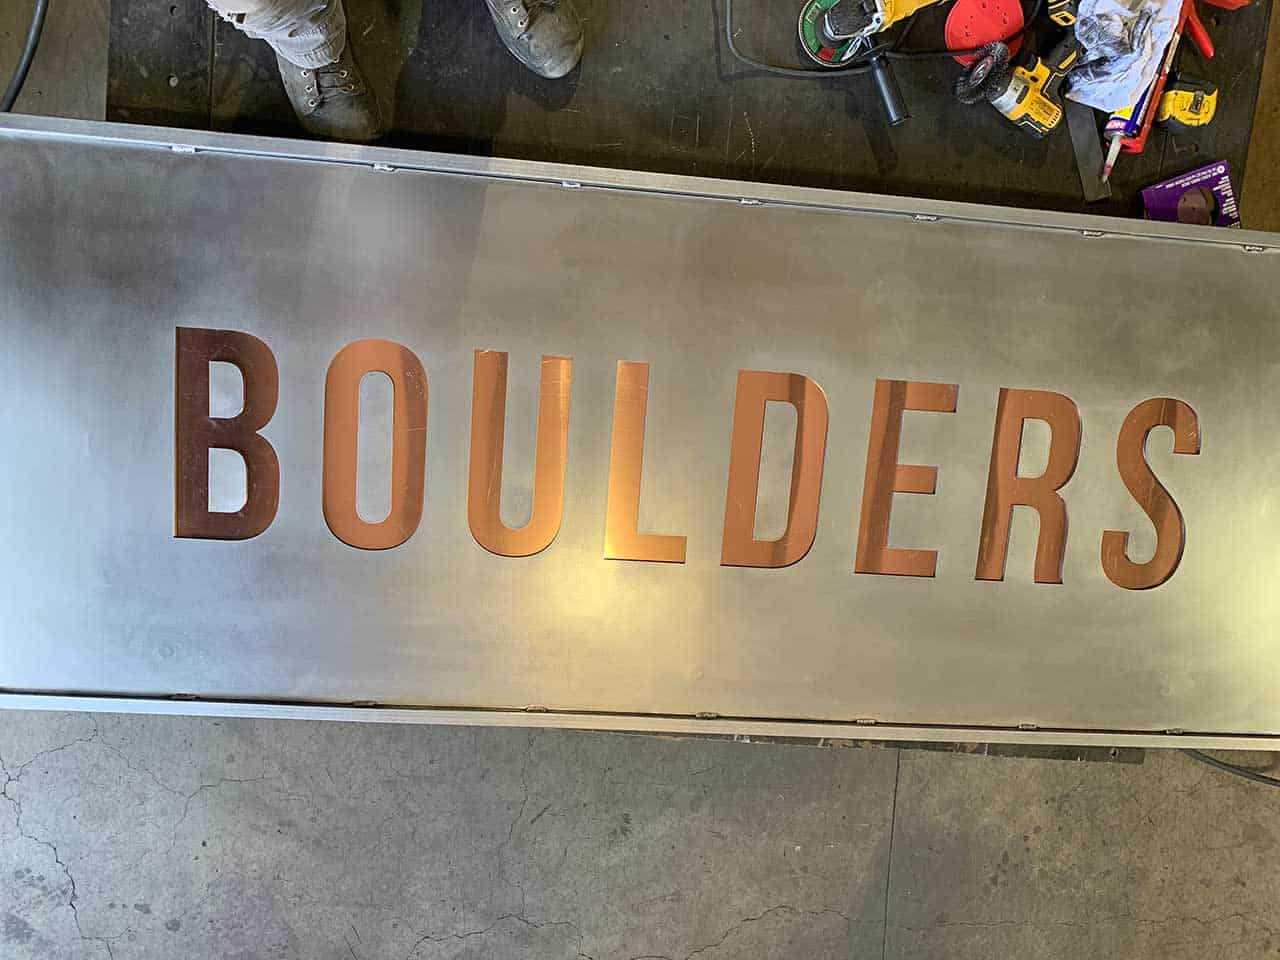 A metallic sign with the word "BOULDERS" inscribed in large copper letters is placed on a concrete floor. Tools and materials surround the sign.